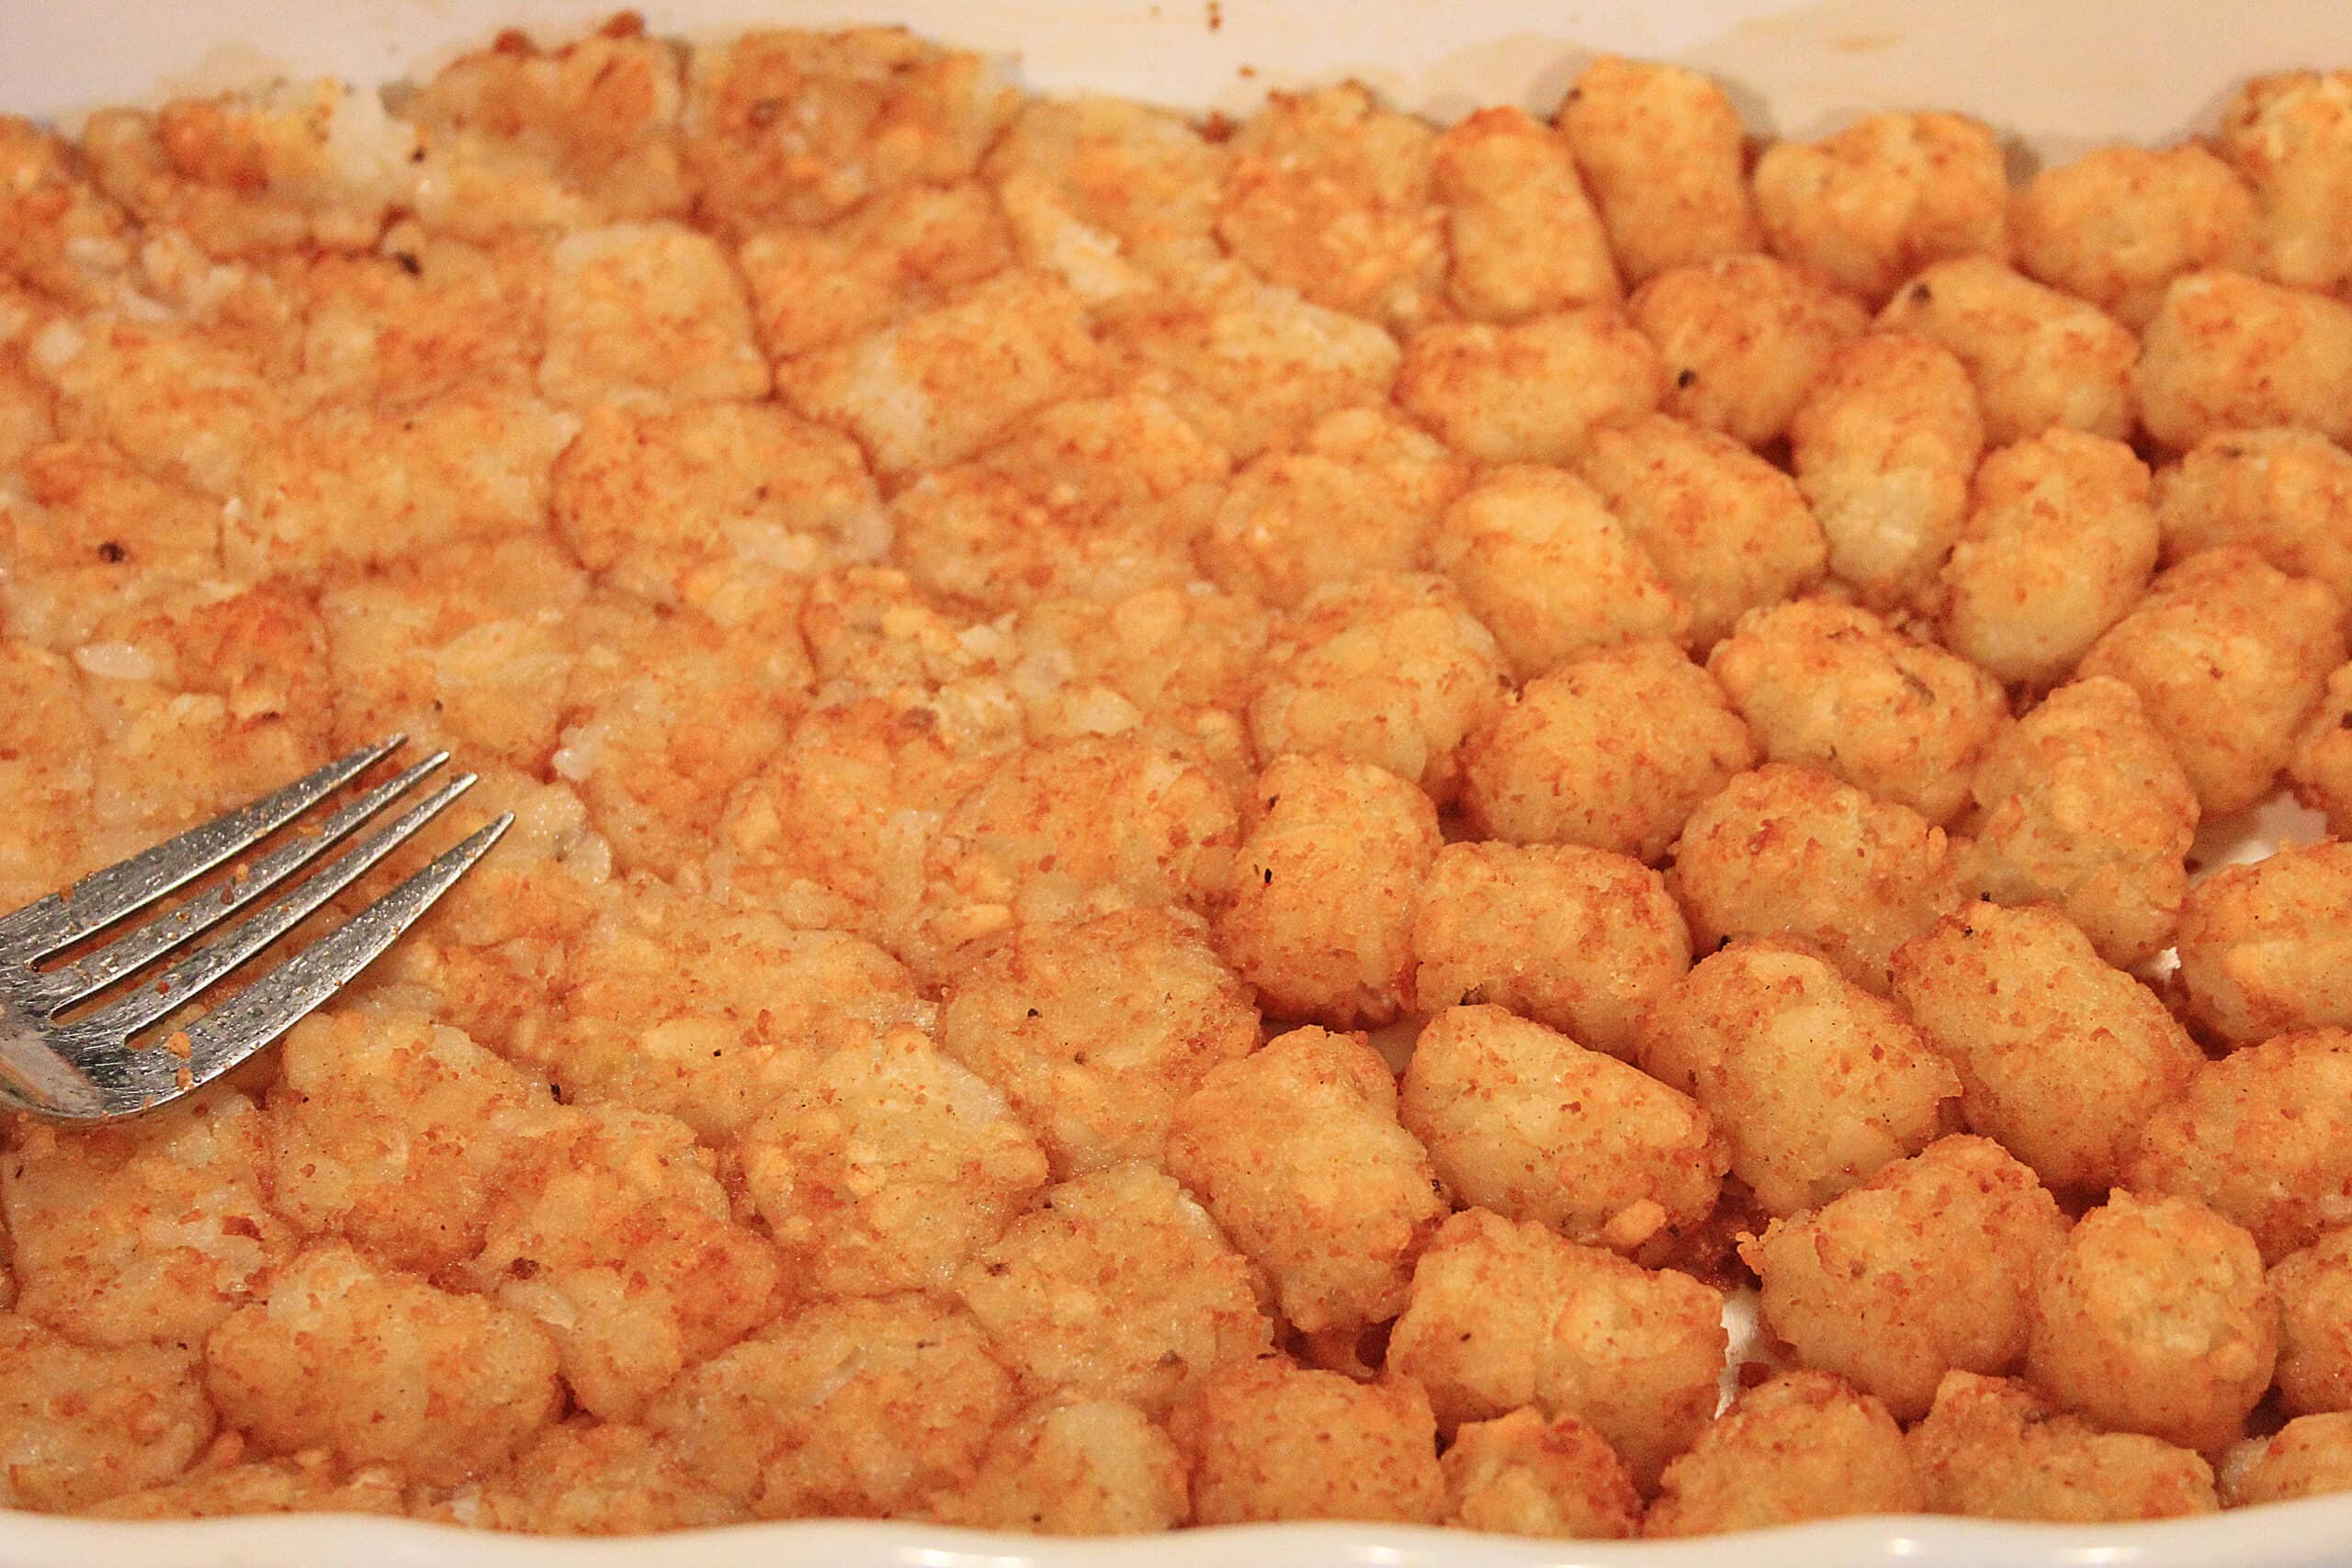 tater tots in the bottom of a dish